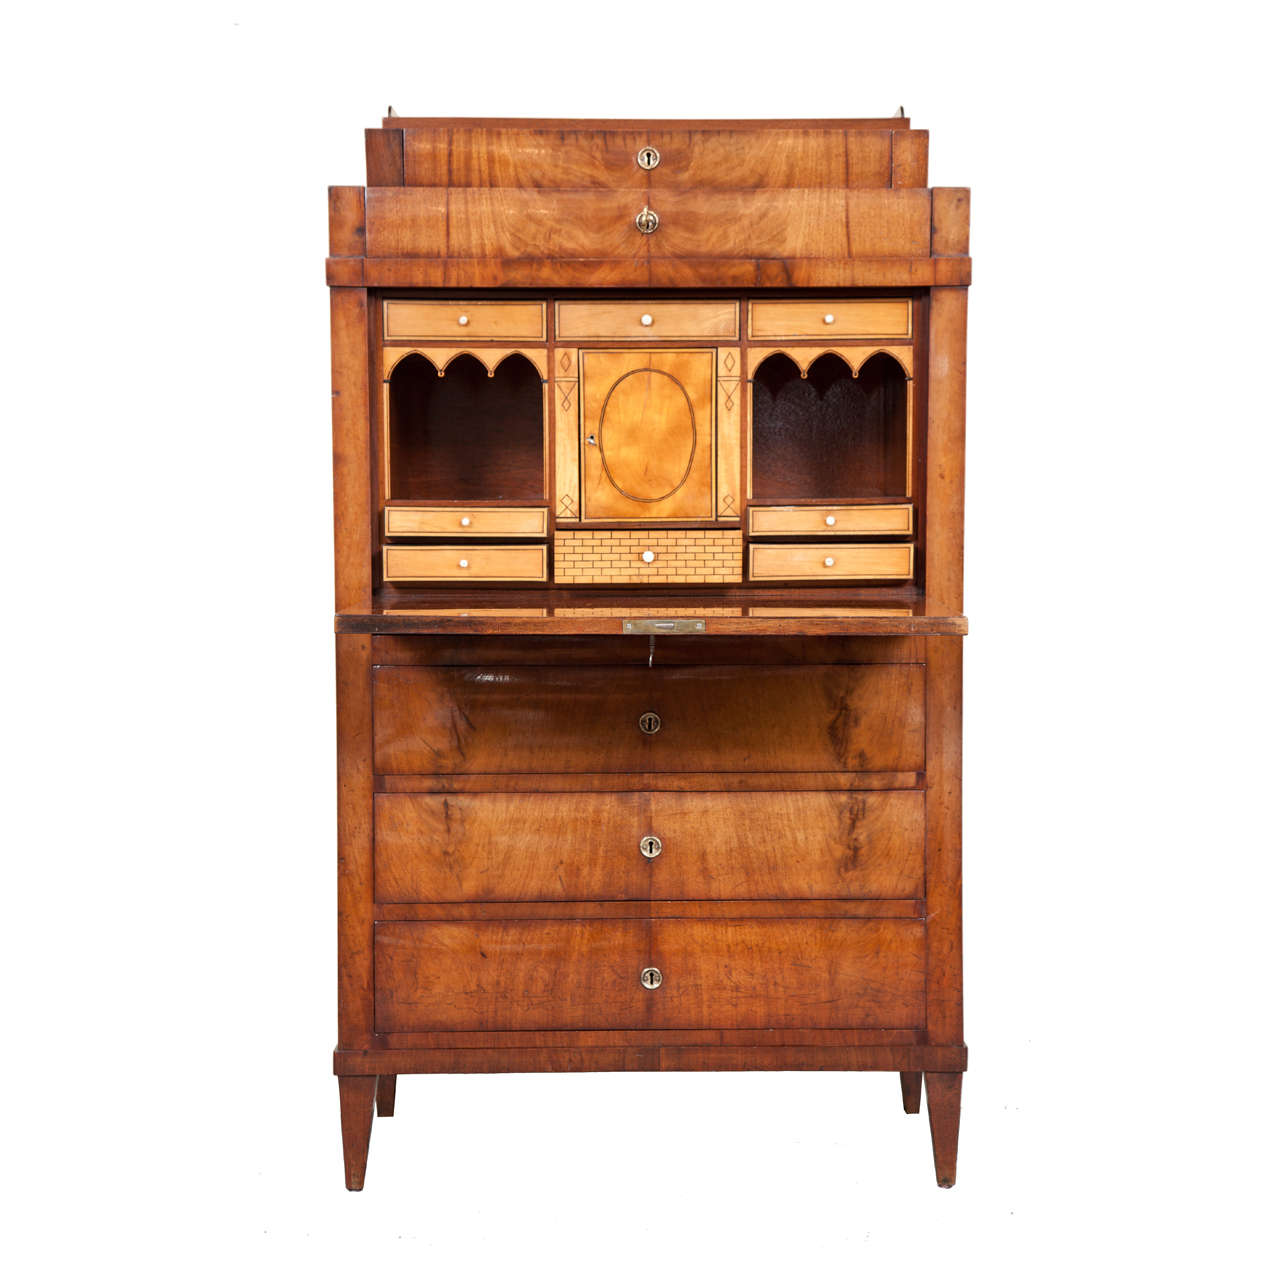 A Danish Empire mahogany and fruitwood inlaid fall-front secretaire, Early 19th Century, the rectangular galleried top above two stepped drawers, the drop front writing surface opening to an architecturally fitted interior with various drawers and a